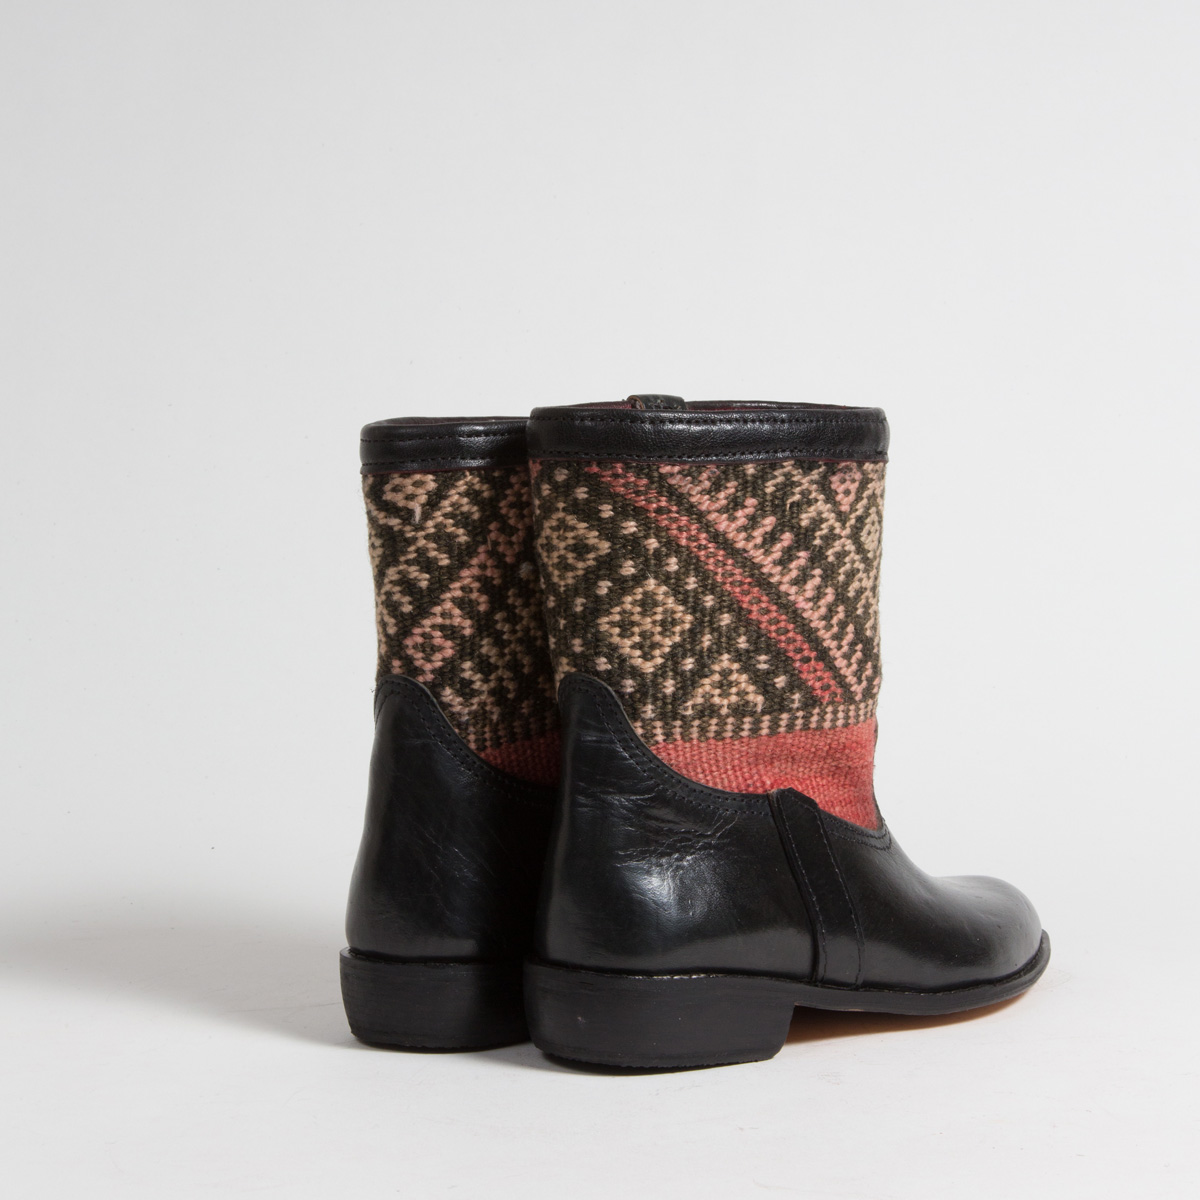 Bottines Kilim cuir mababouche artisanales (Réf. RPN16-39)